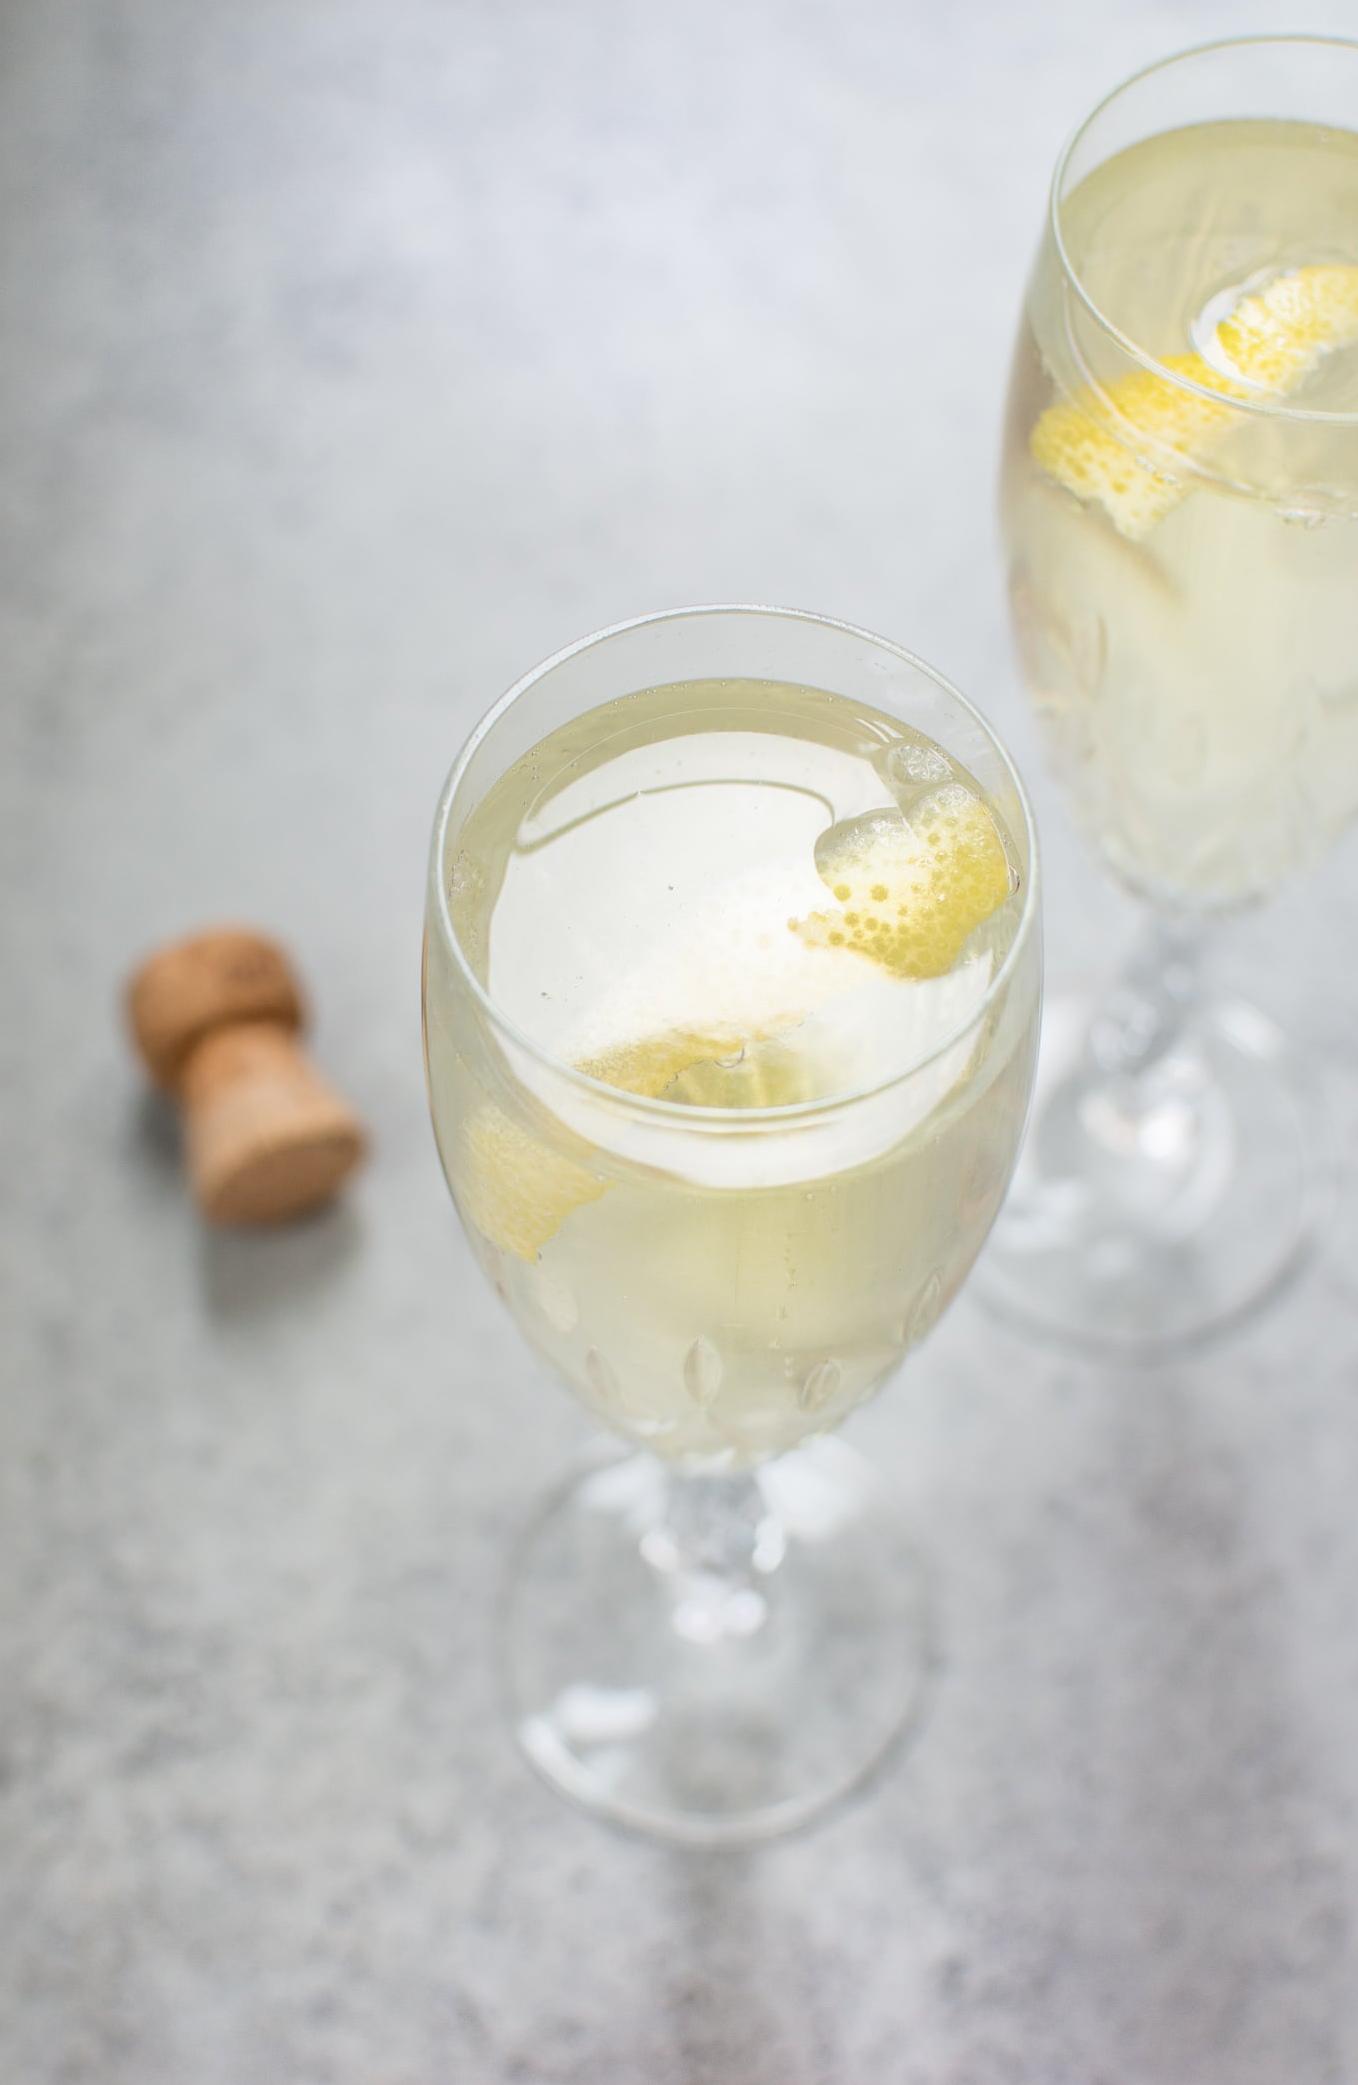  Start the party with a pop of bubbly citrus delight